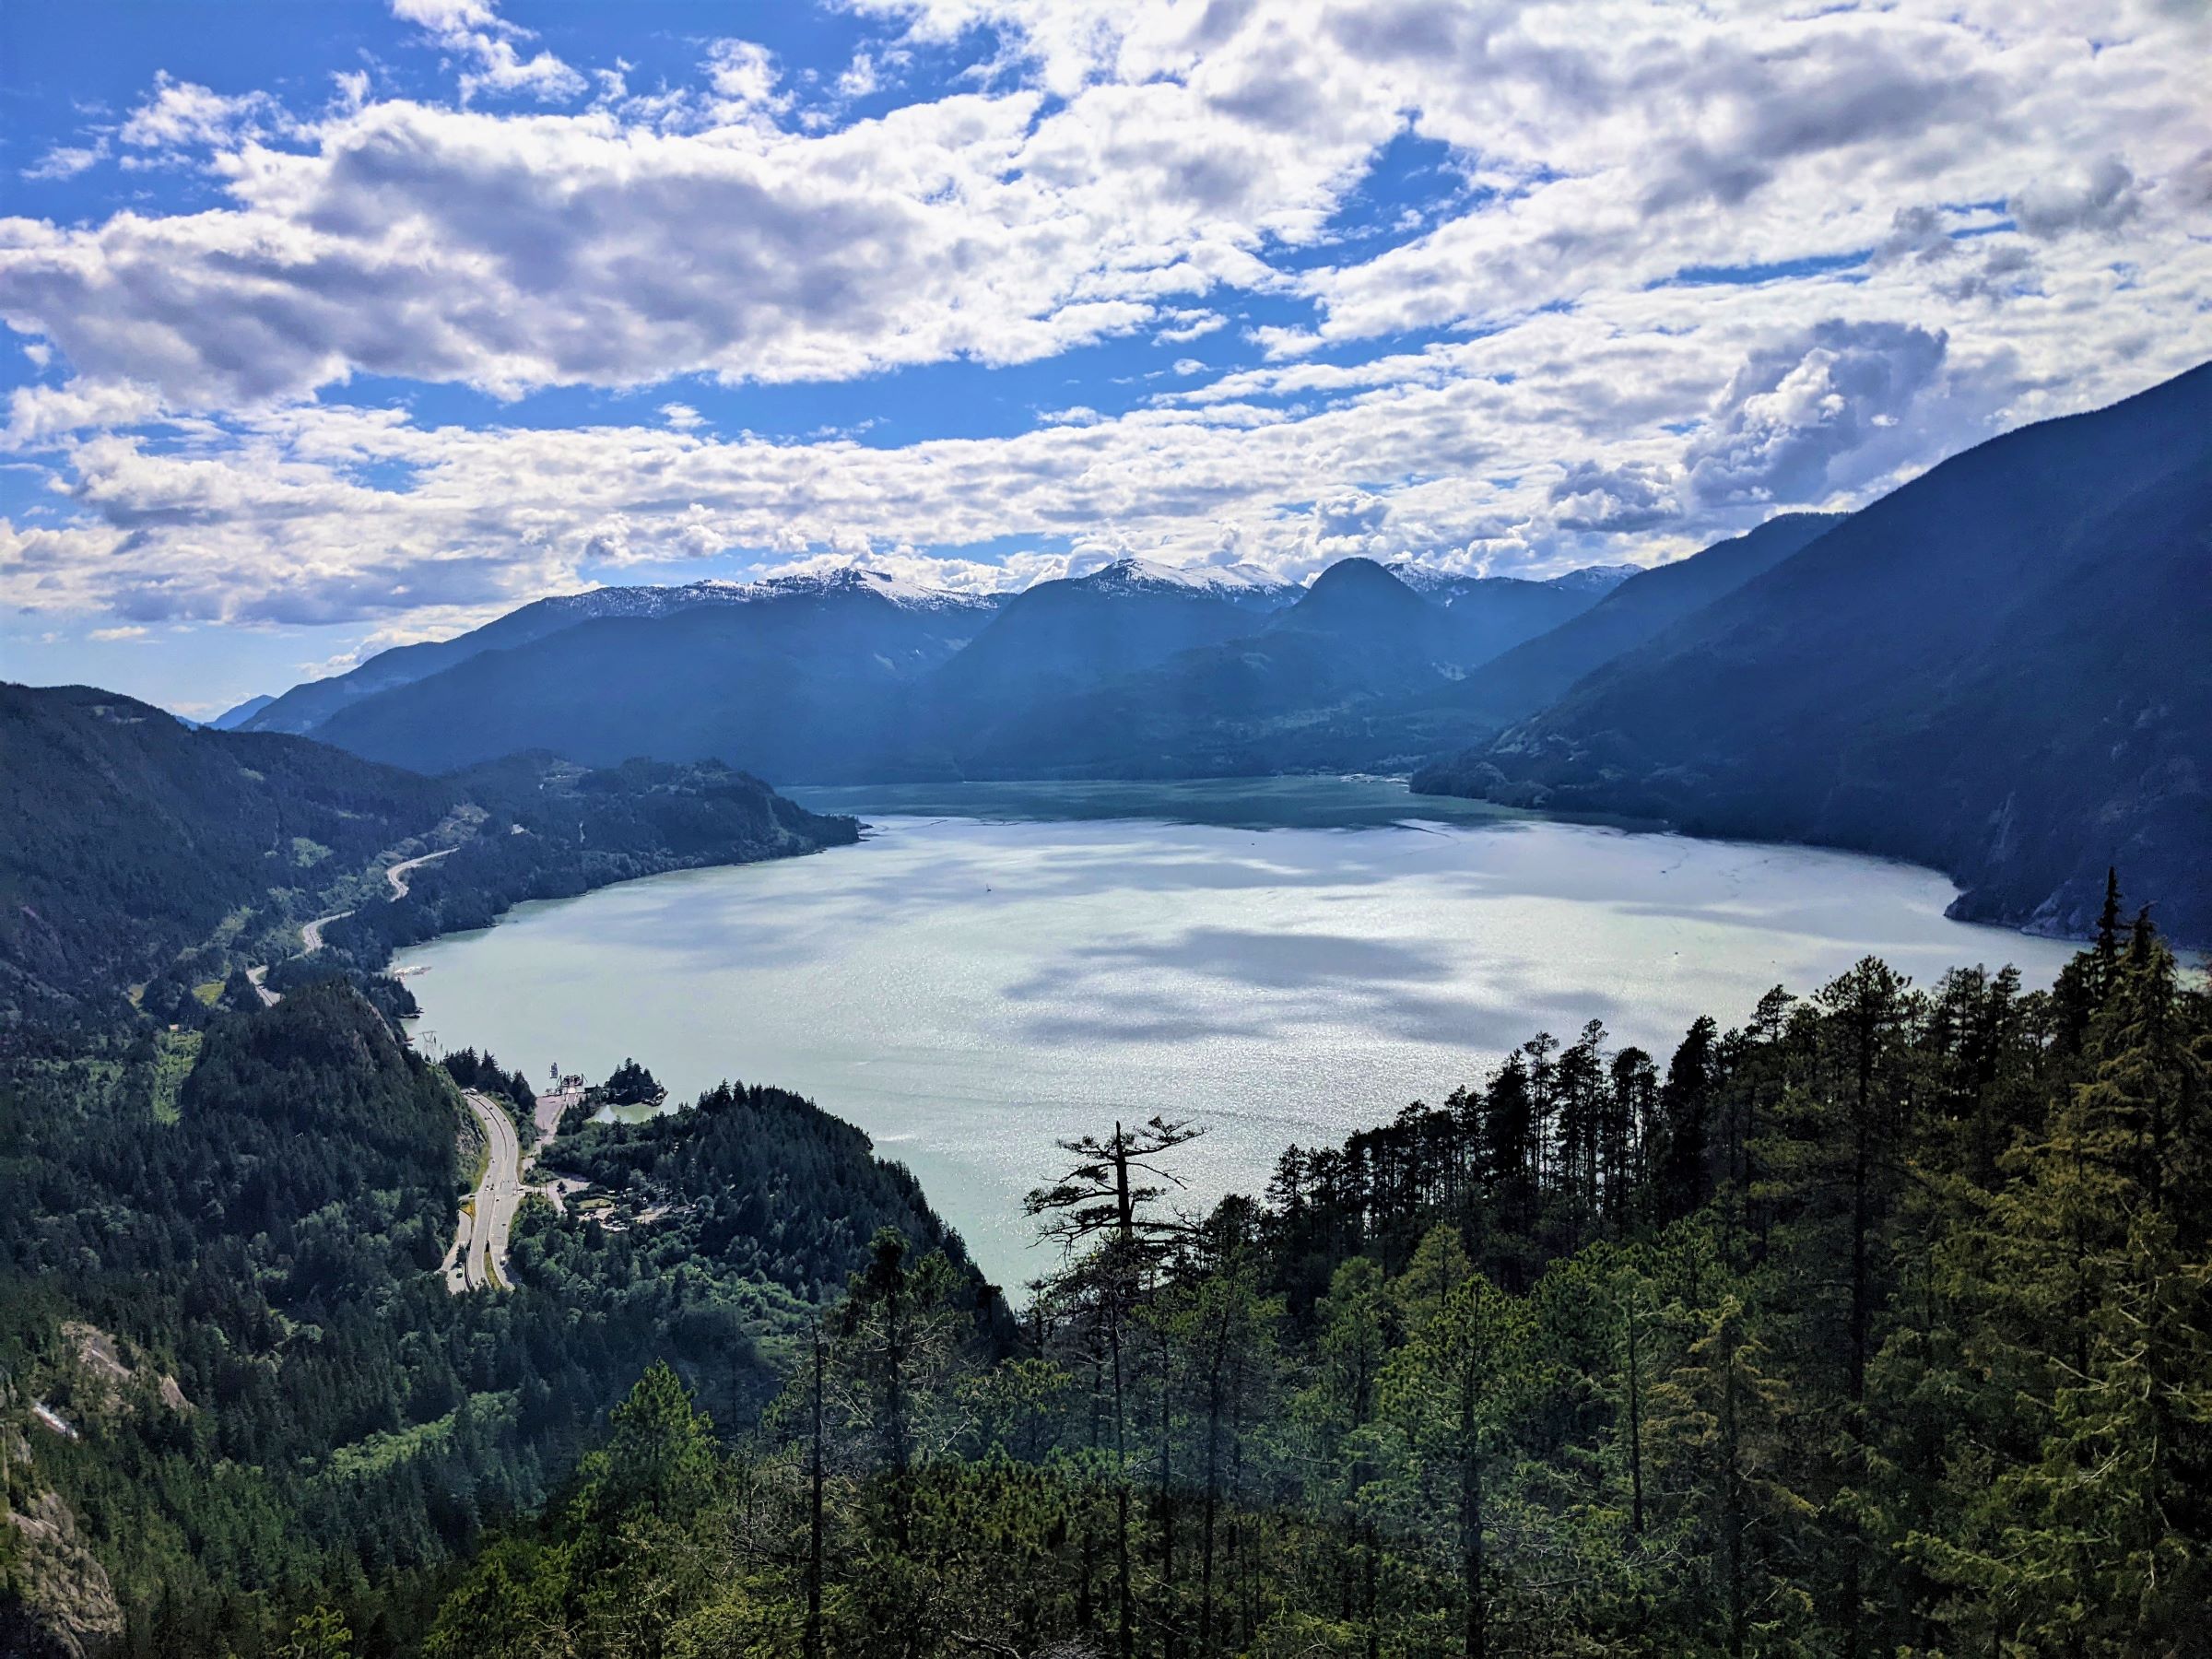 Howe Sound landscape from above